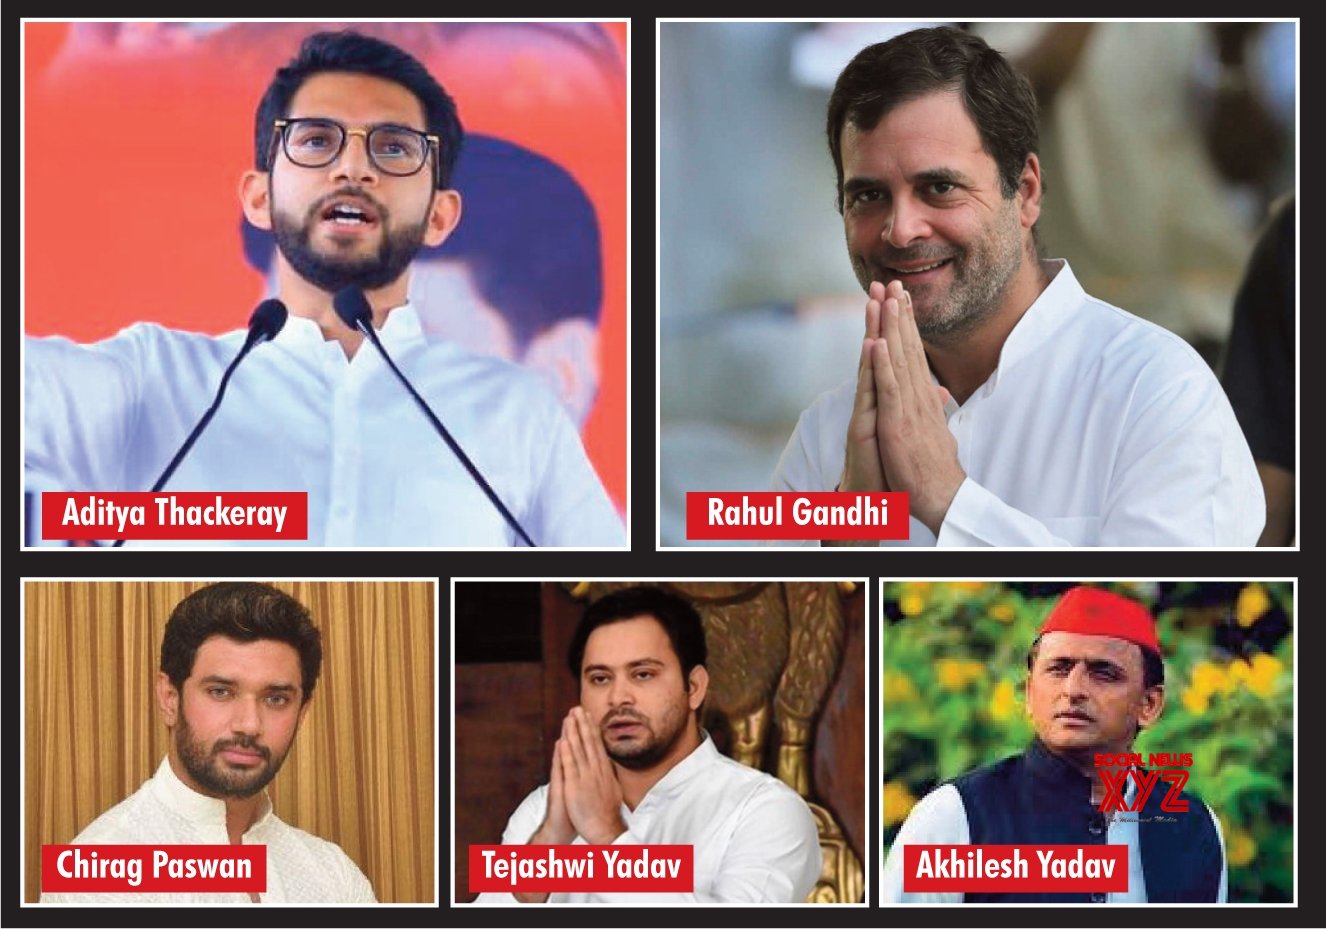 'Putramoh' -- 5 sons in Indian politics who remind us of Mahabharata